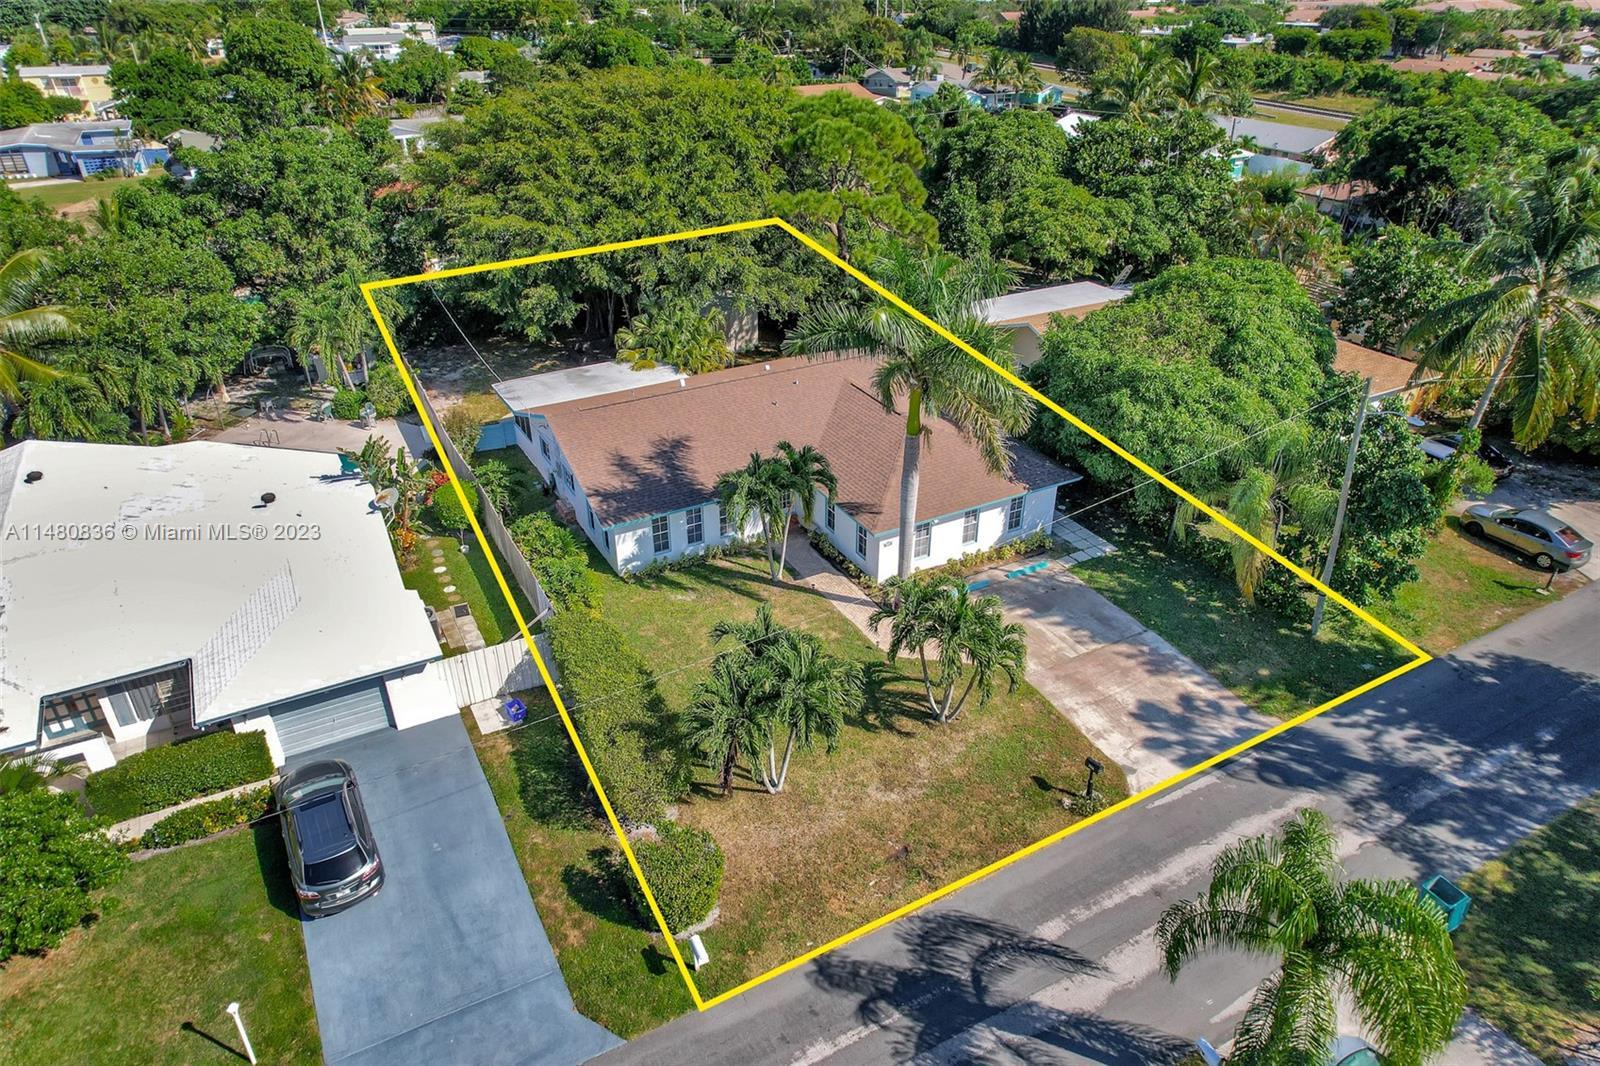 WOW! Amazing 4 Bedroom 3 bath home in East Boynton. Close to the beach and I95. This large home is l